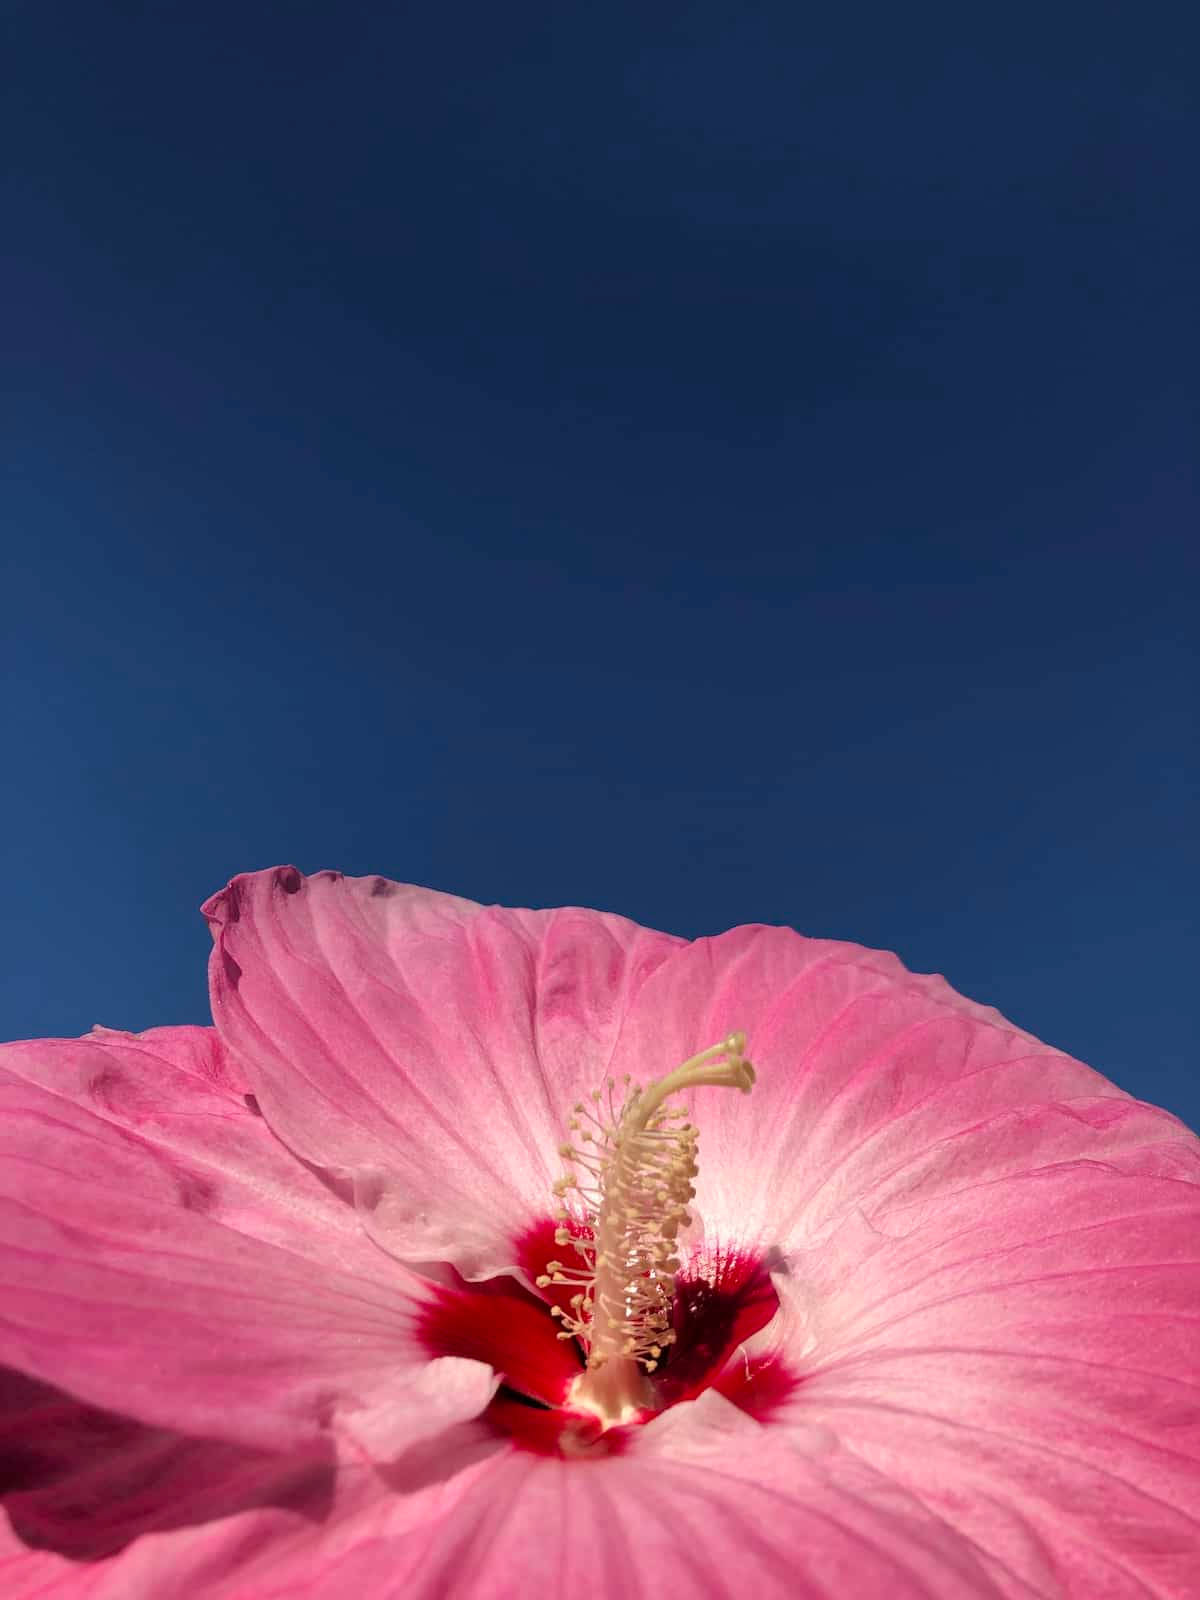 Stunning Dinner Plate Hibiscus In Full Bloom Background